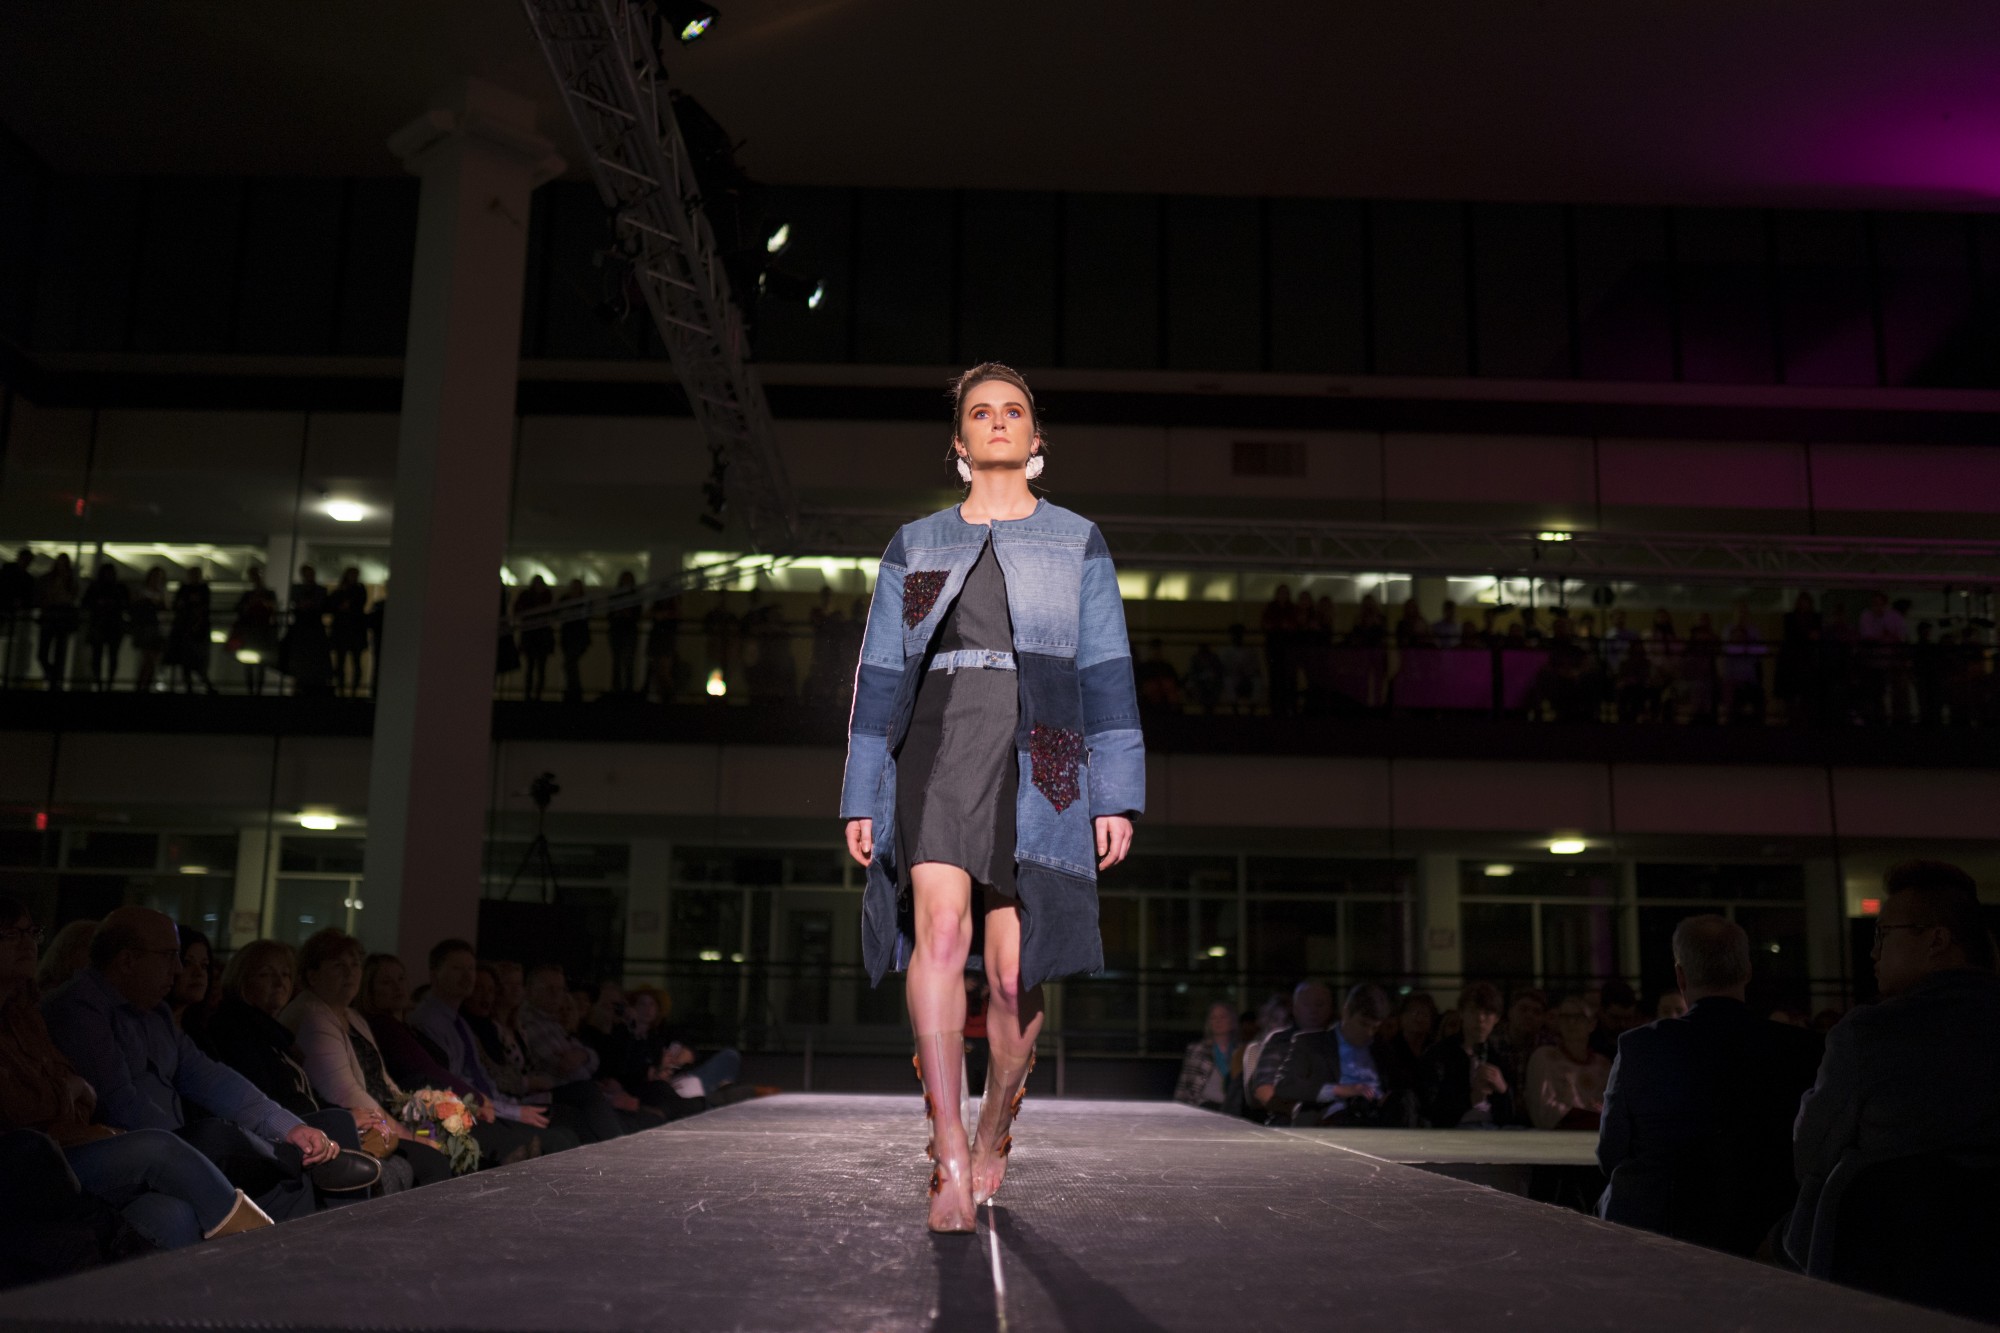 A model showing Designer Andrea Dunruds work walks the runway at the Amplified fashion show at Rapson Hall on Saturday, Feb. 15. The show features designs by University of Minnesota apparel design seniors.